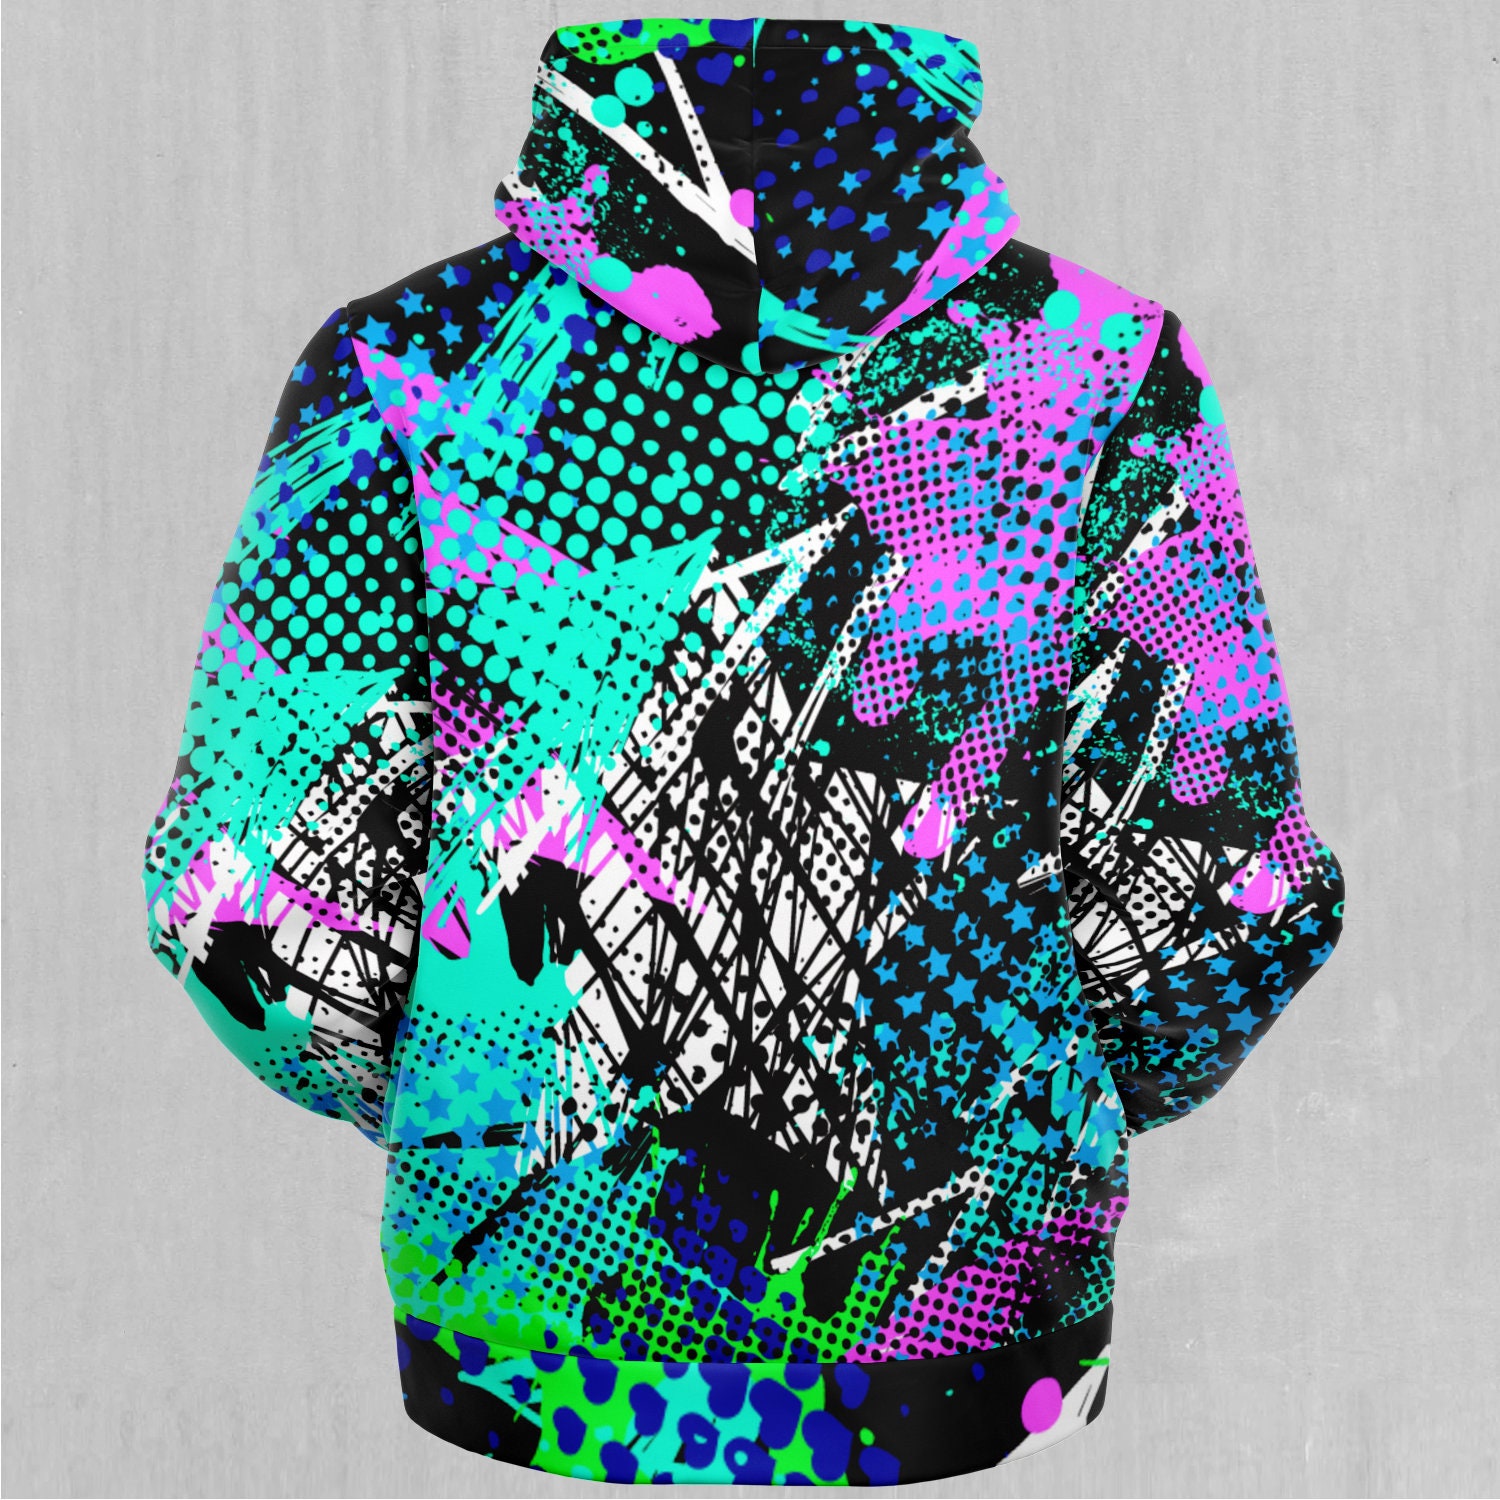 Discover Electric Avenue Retro Vaporwave Pastel Abstract Sherpa Microfleece Zip-Up Hoodie